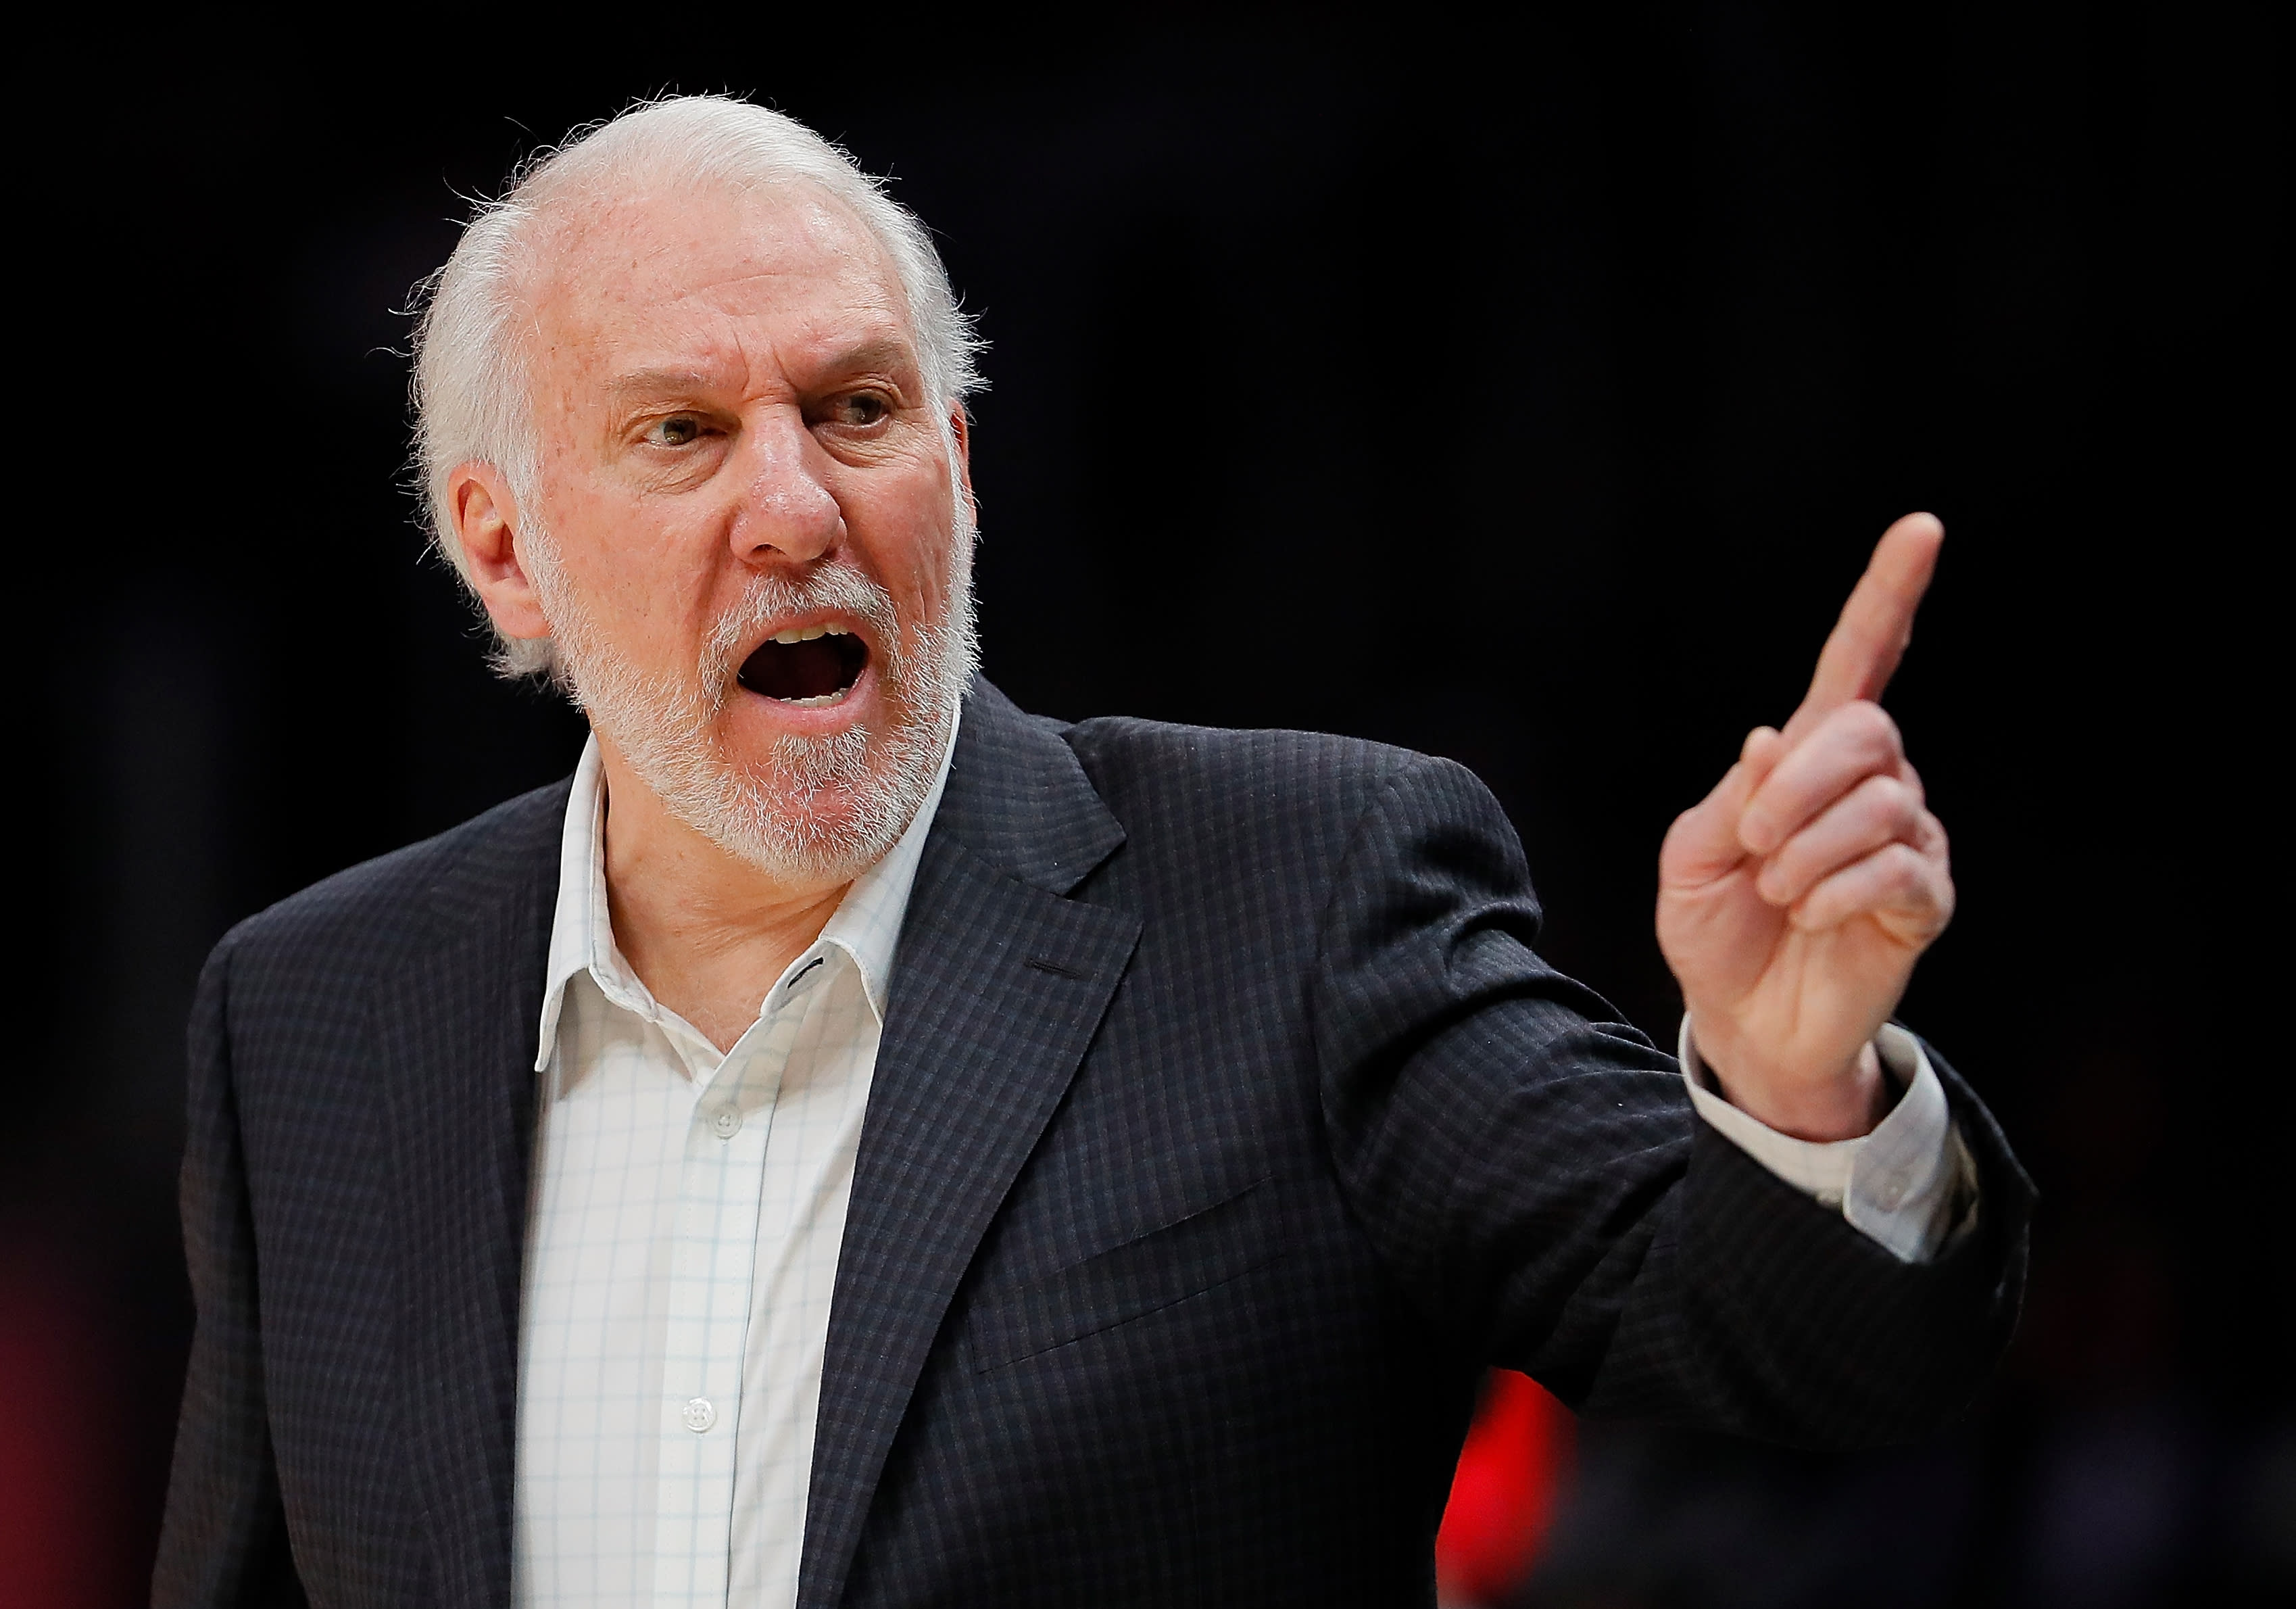 Gregg Popovich unleashes fiery statement on Trump: 'What we have ...